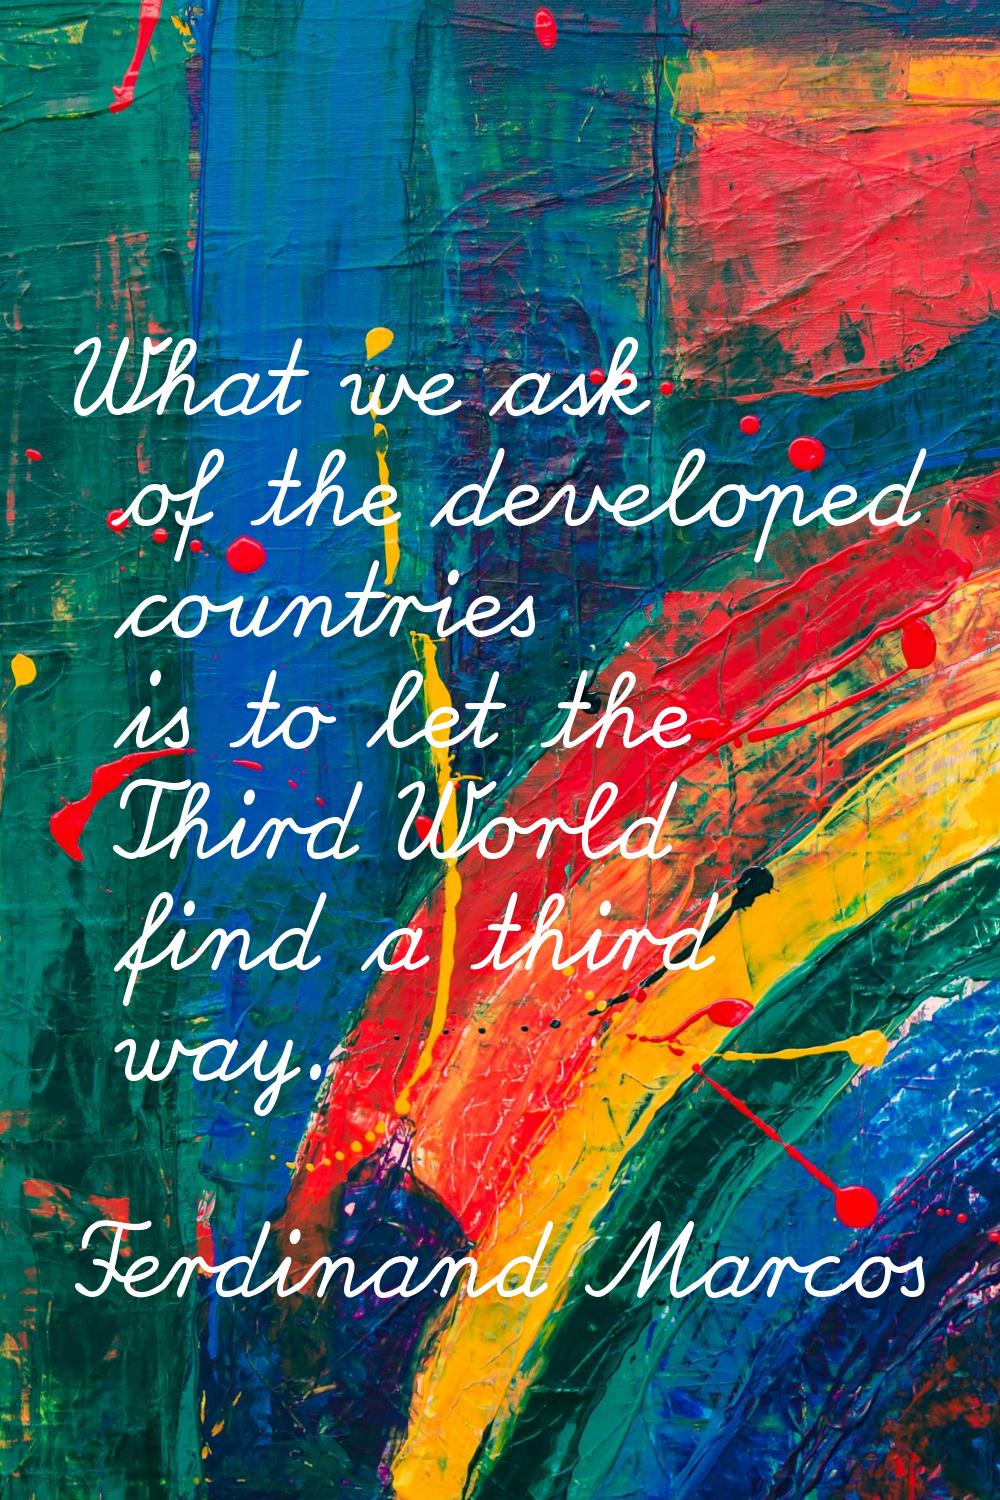 What we ask of the developed countries is to let the Third World find a third way.